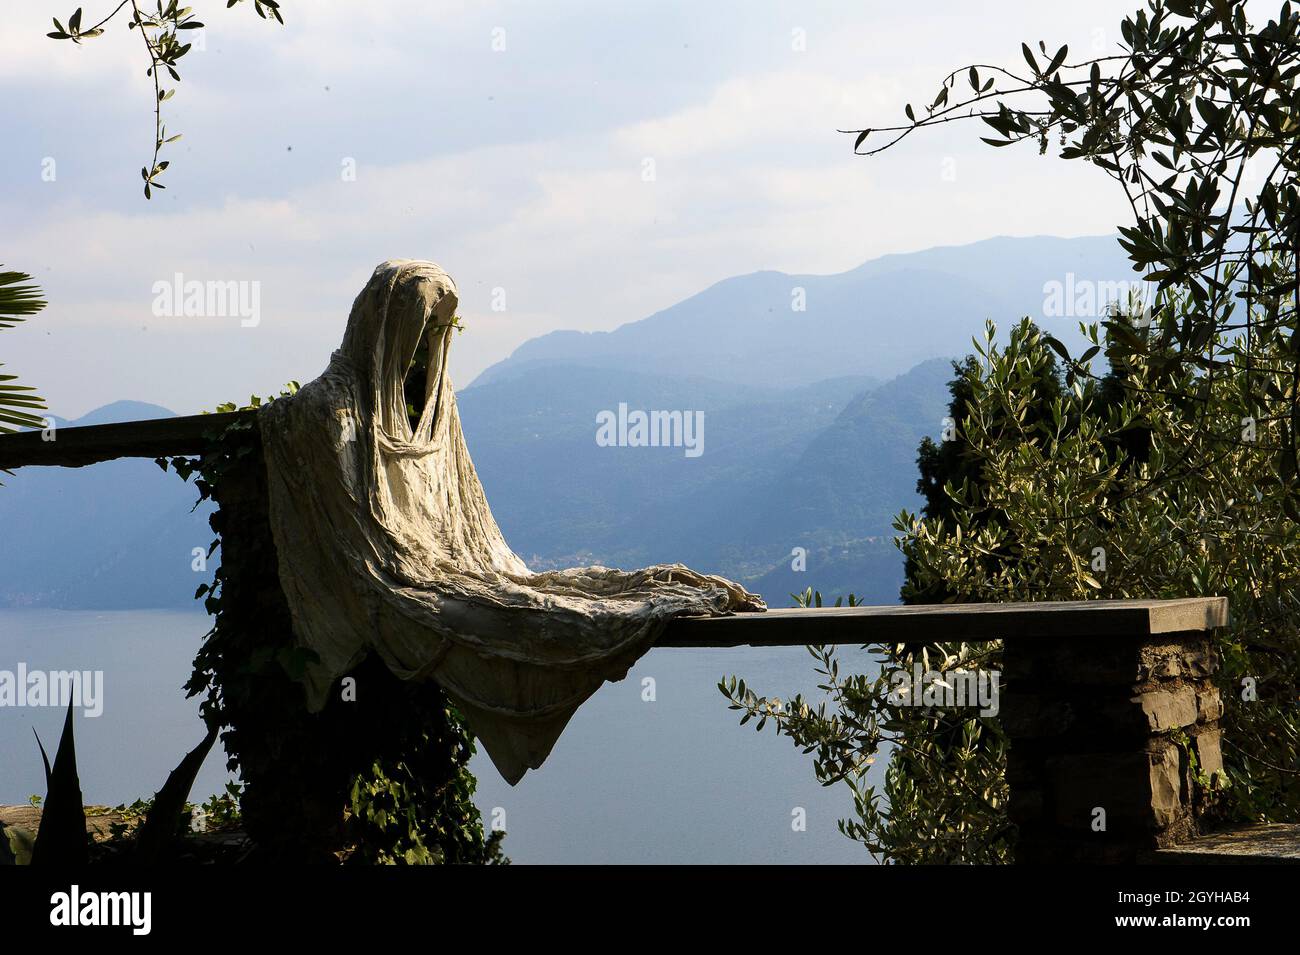 Europe, Italy, Lombardy, Lecco province, Lake Lario, Varenna, Vezio Castle and its ghosts. Stock Photo